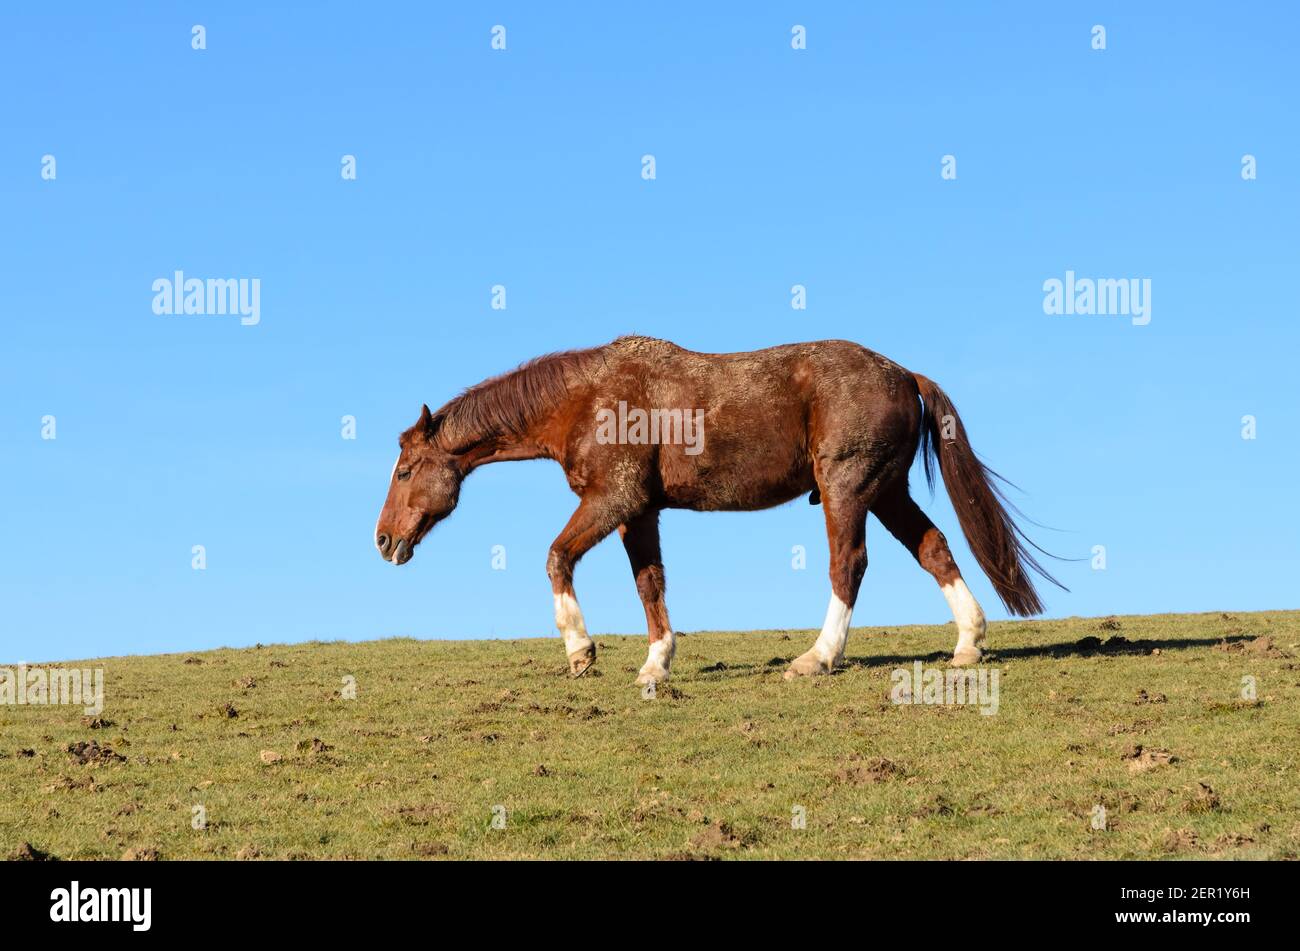 One single domestic brown thoroughbred horse (Equus ferus caballus), standing on a pasture in the countryside, blue sky, Germany, Western Europe Stock Photo